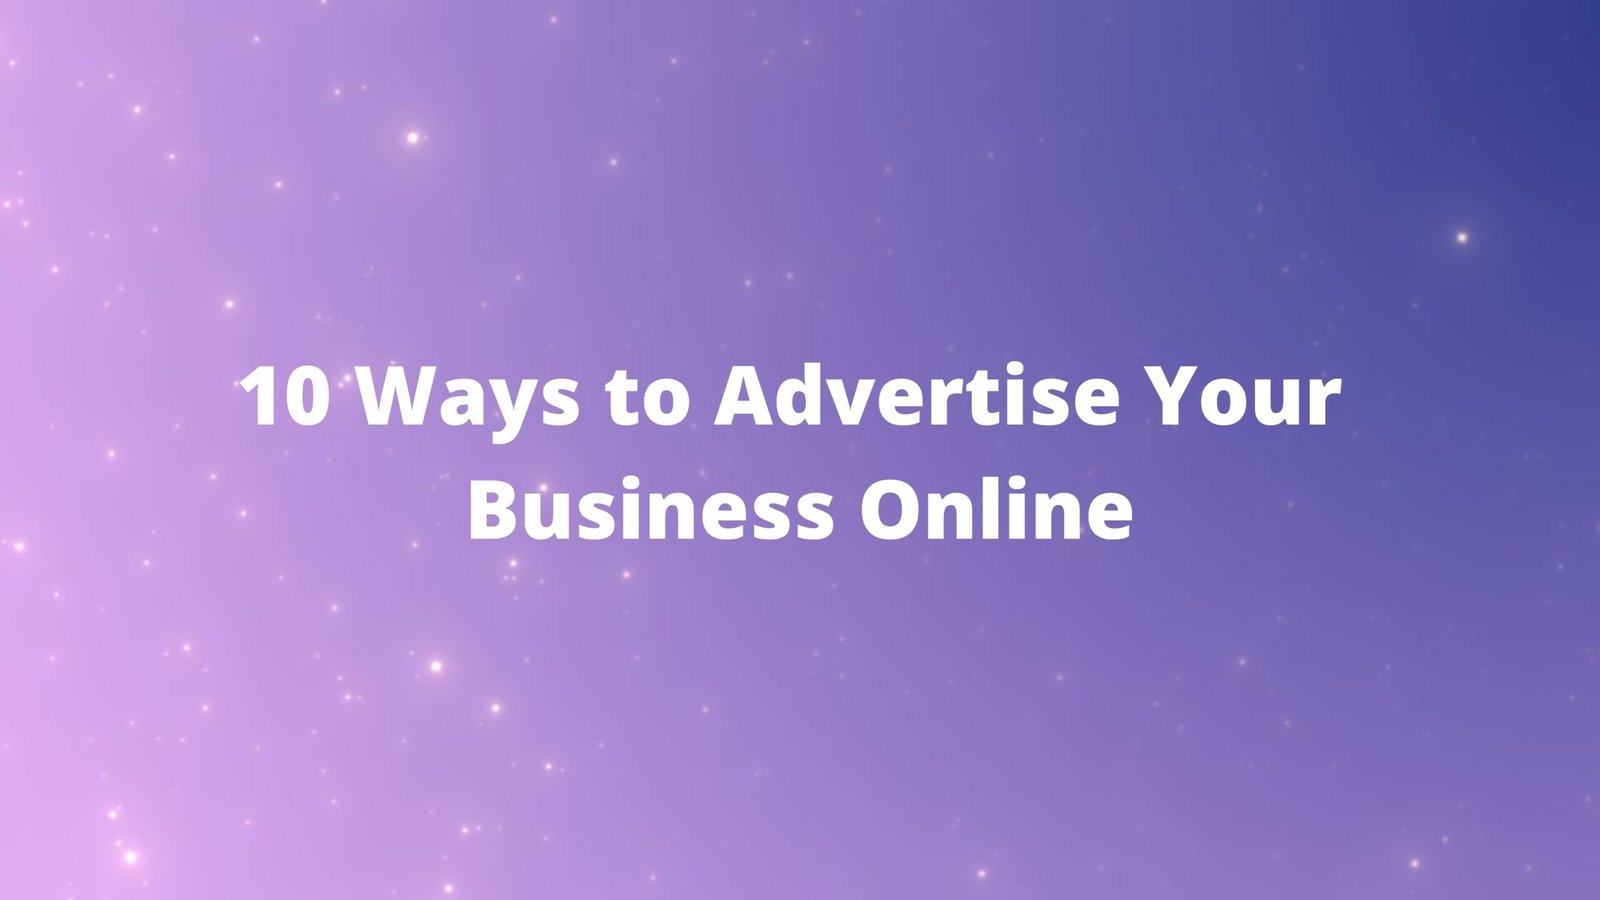 10 Ways to Advertise Your Business Online